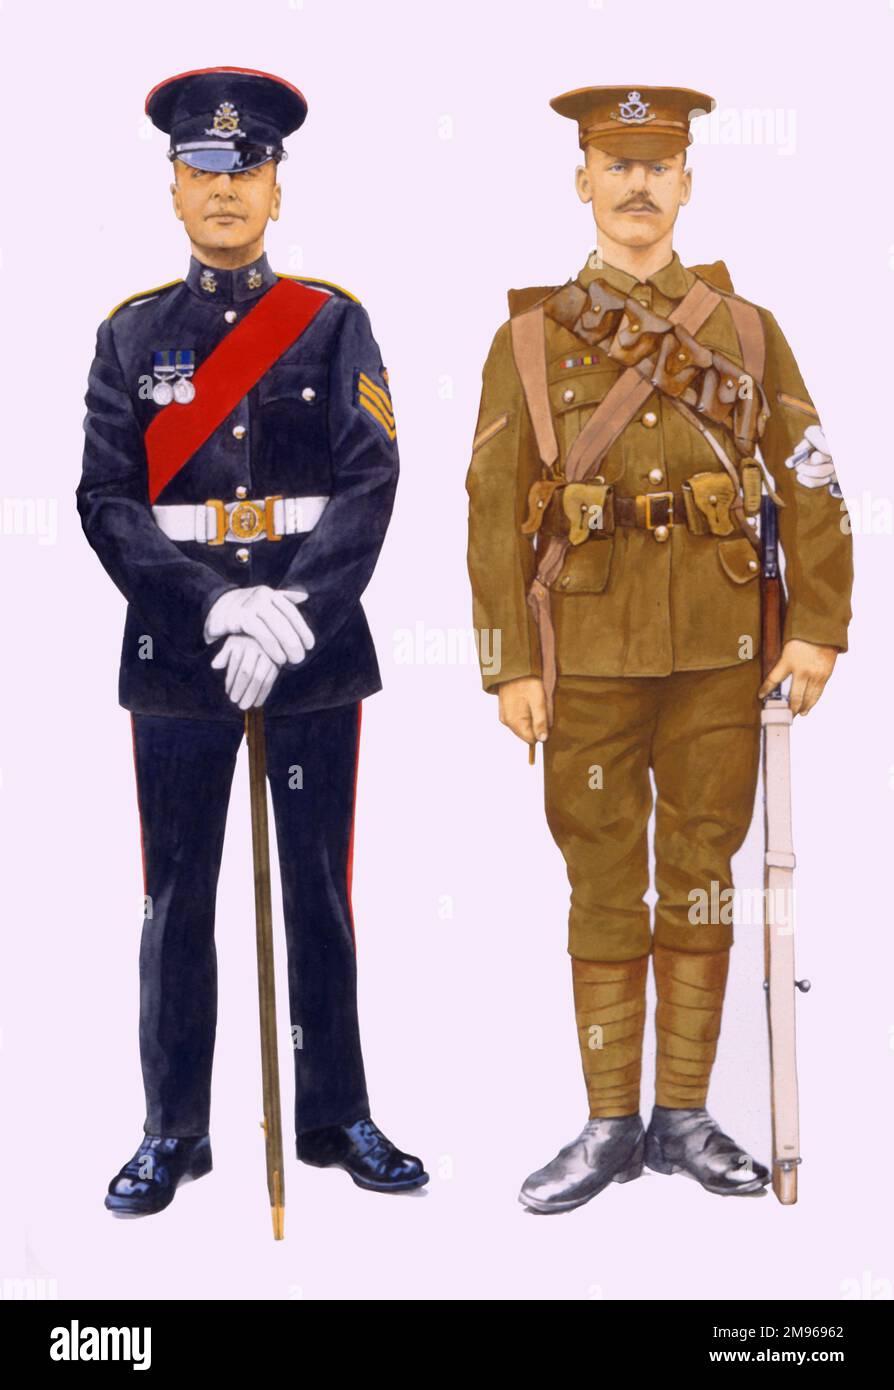 Lance Corporal - South Staffordshire Regiment (left) and Colour Sergeant - North Staffordshire Regiment (right) Stock Photo